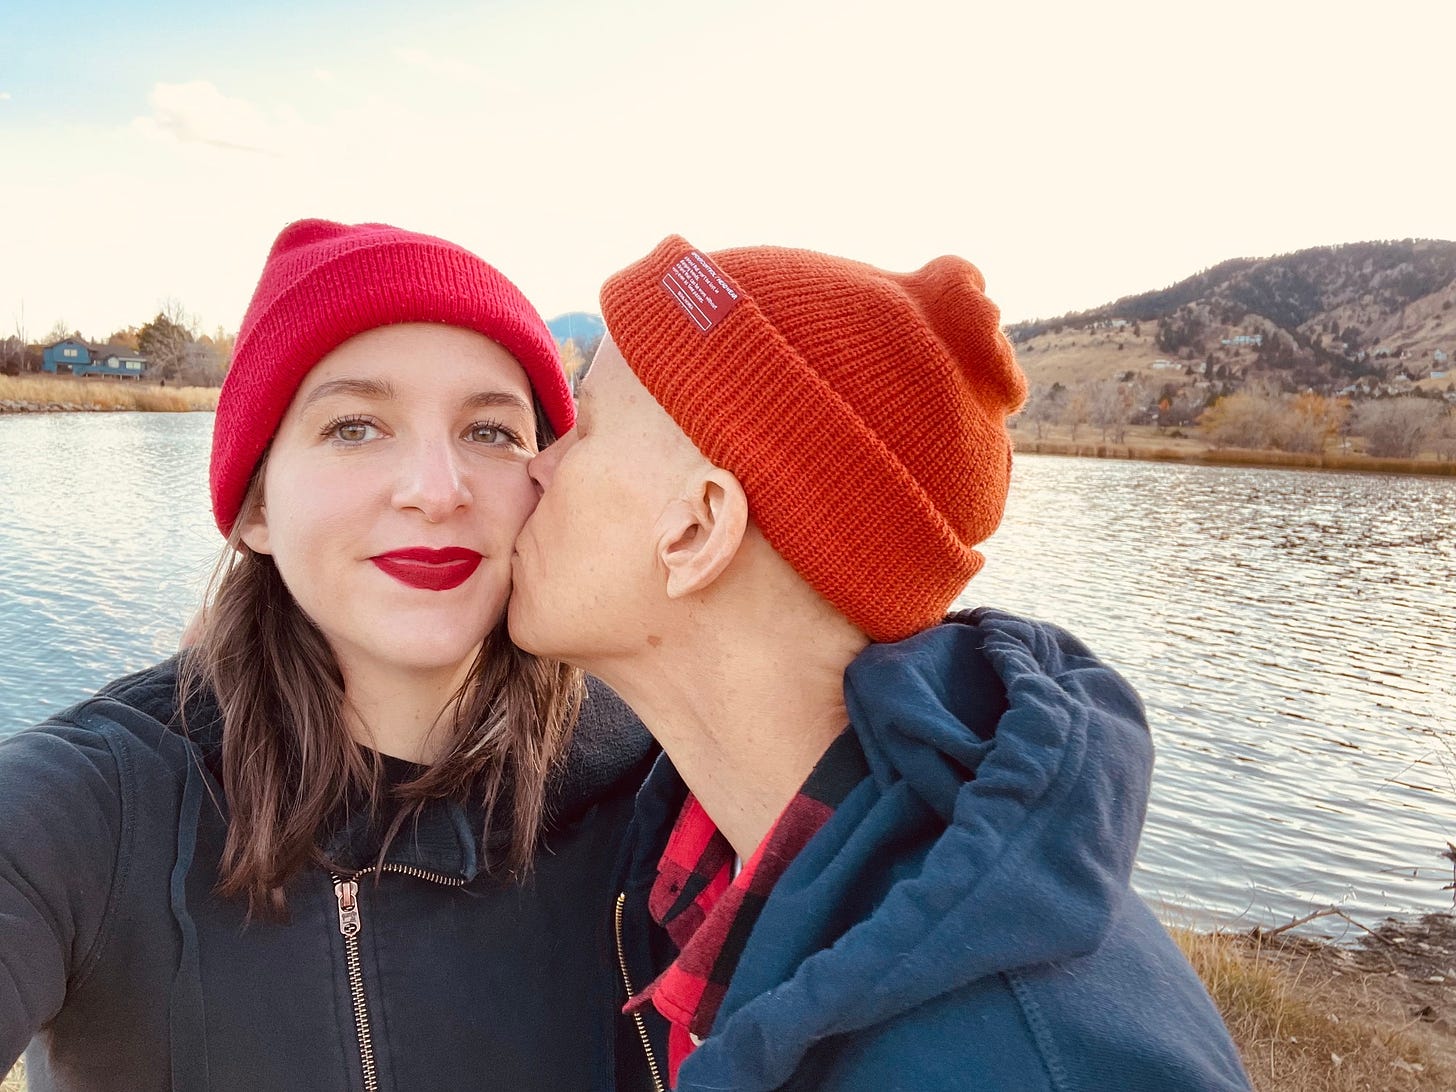 Andrea’s partner Meg wears a red beanie and red lipstick. Andrea, in an orange beanie, is kissing her on the cheek. In the background is a lake with mountains behind them.